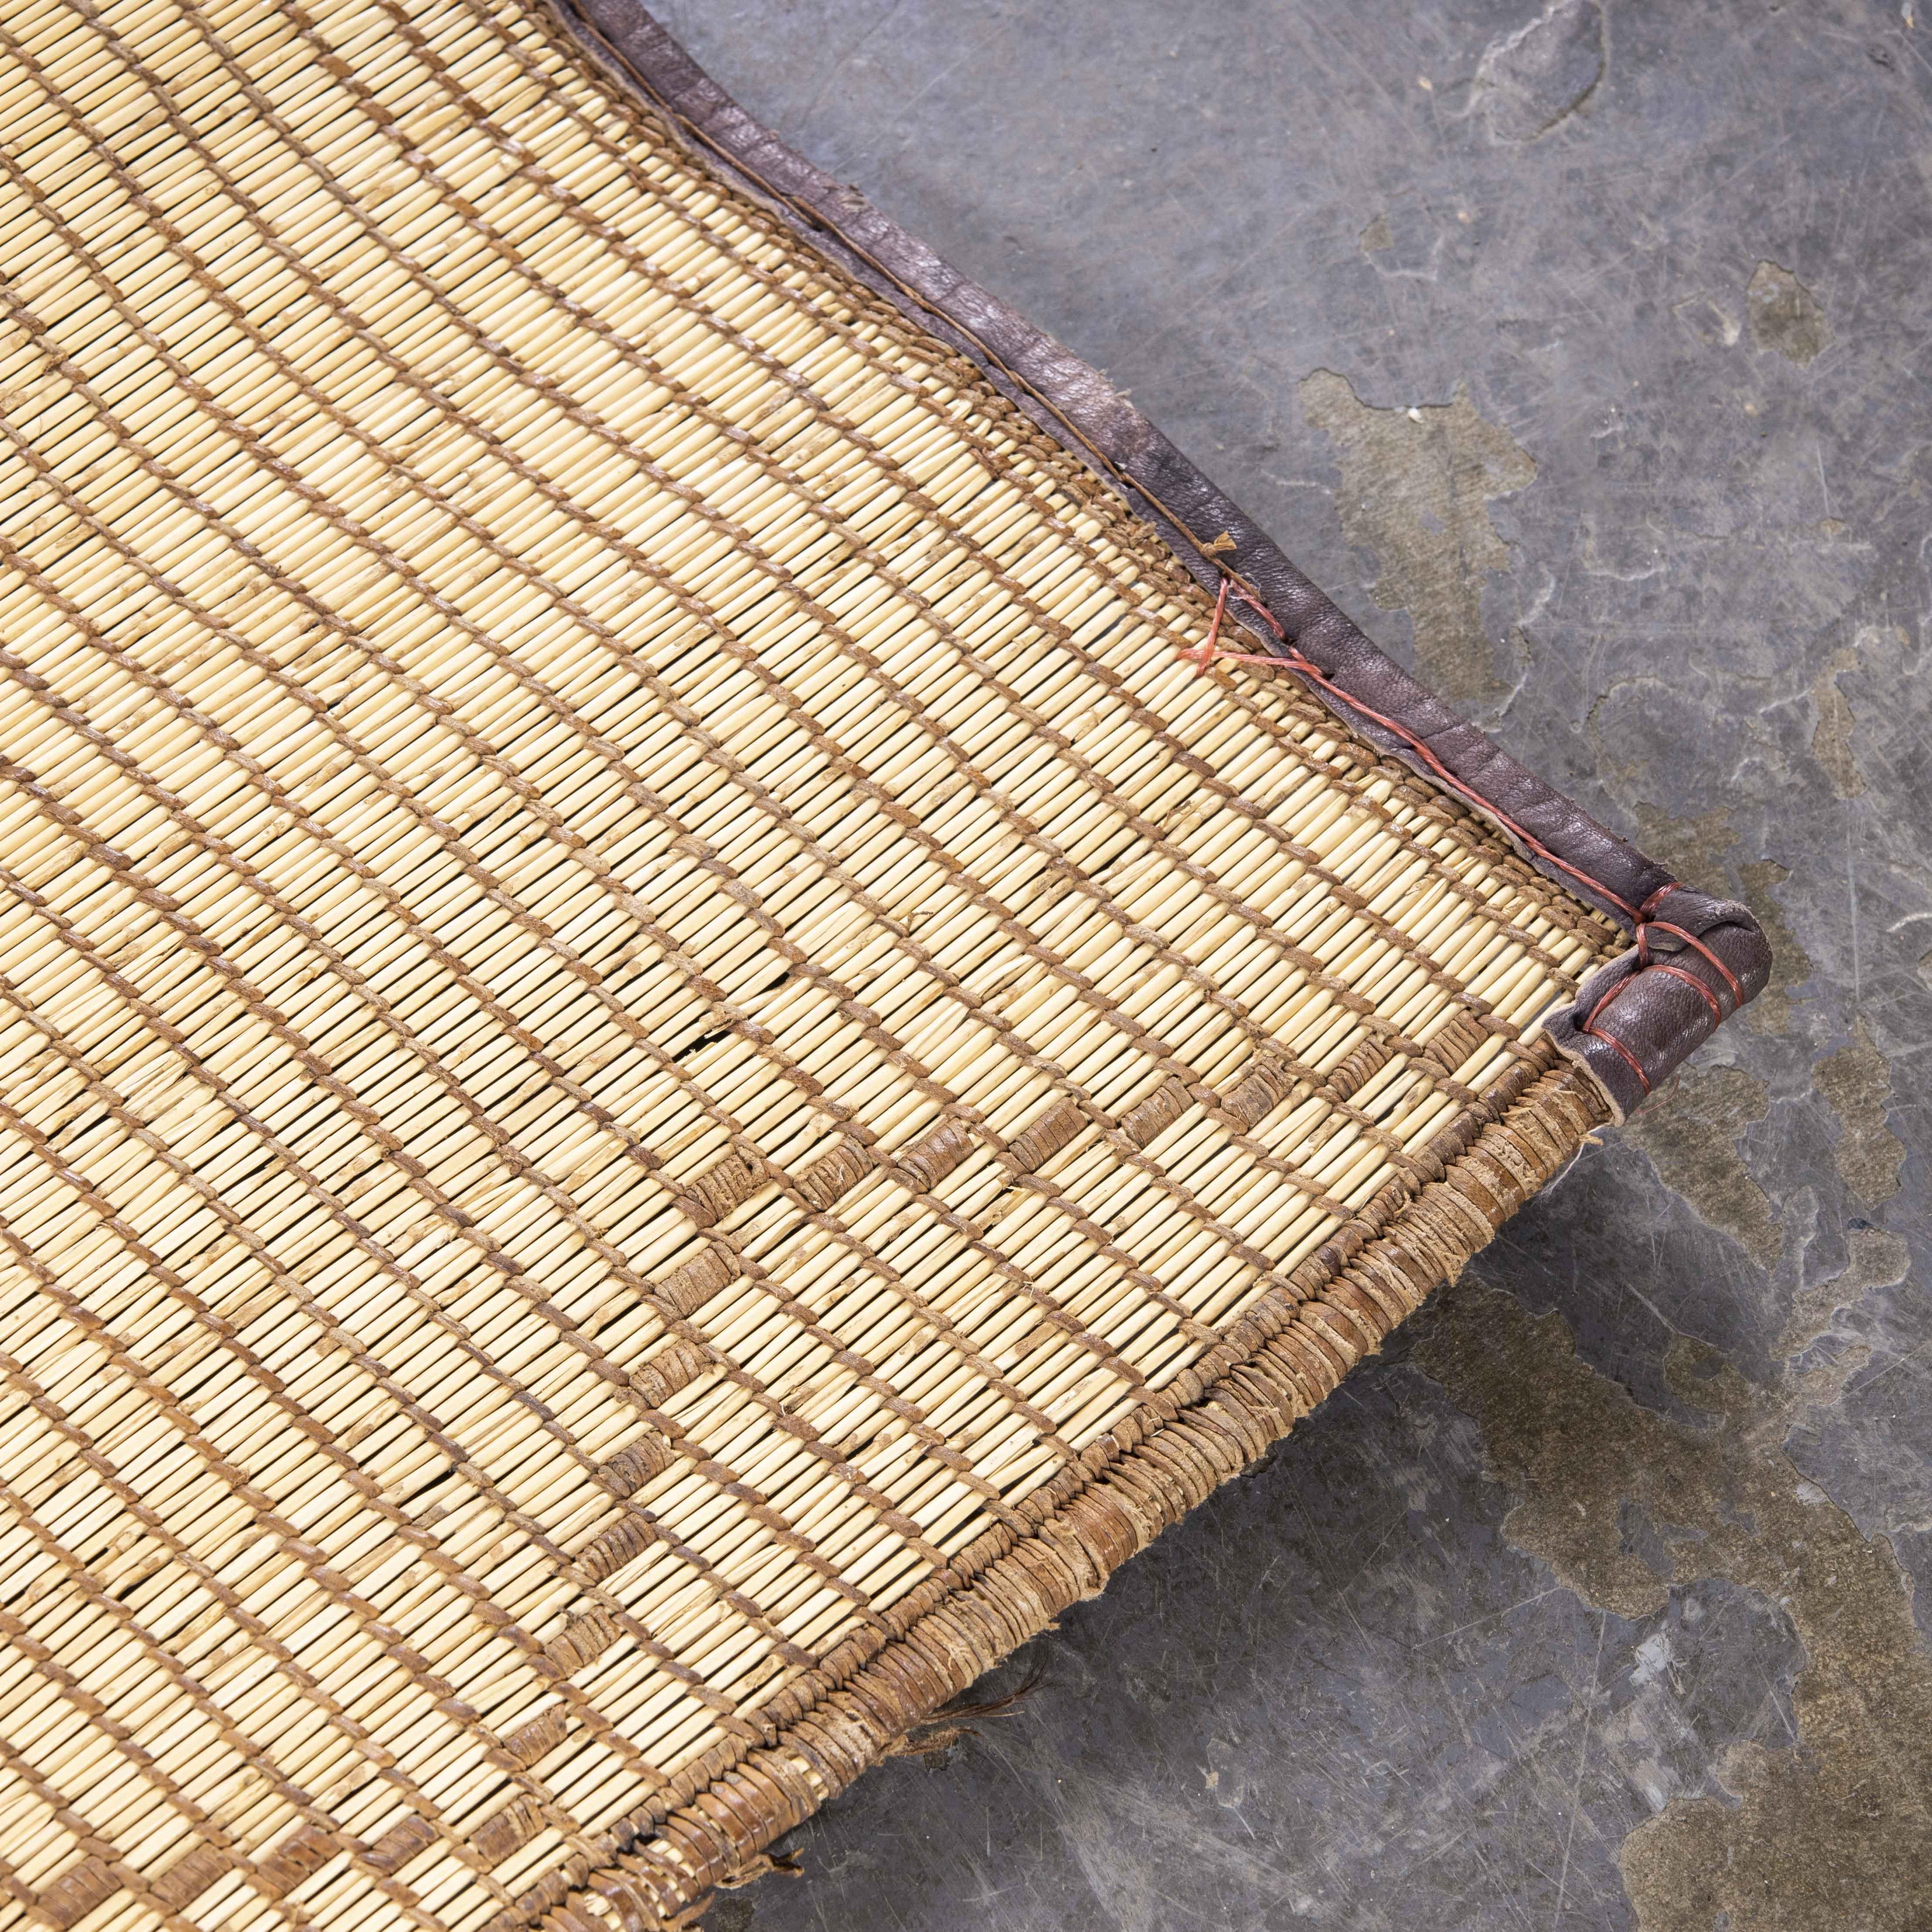 Vintage very large light tuareg floor mat – five meter.
Vintage very large light tuareg floor mat – five meter. Tuareg rugs or flat weave mats are rare and very special, intricately made from fine grass reed and bound with goatskin or camel